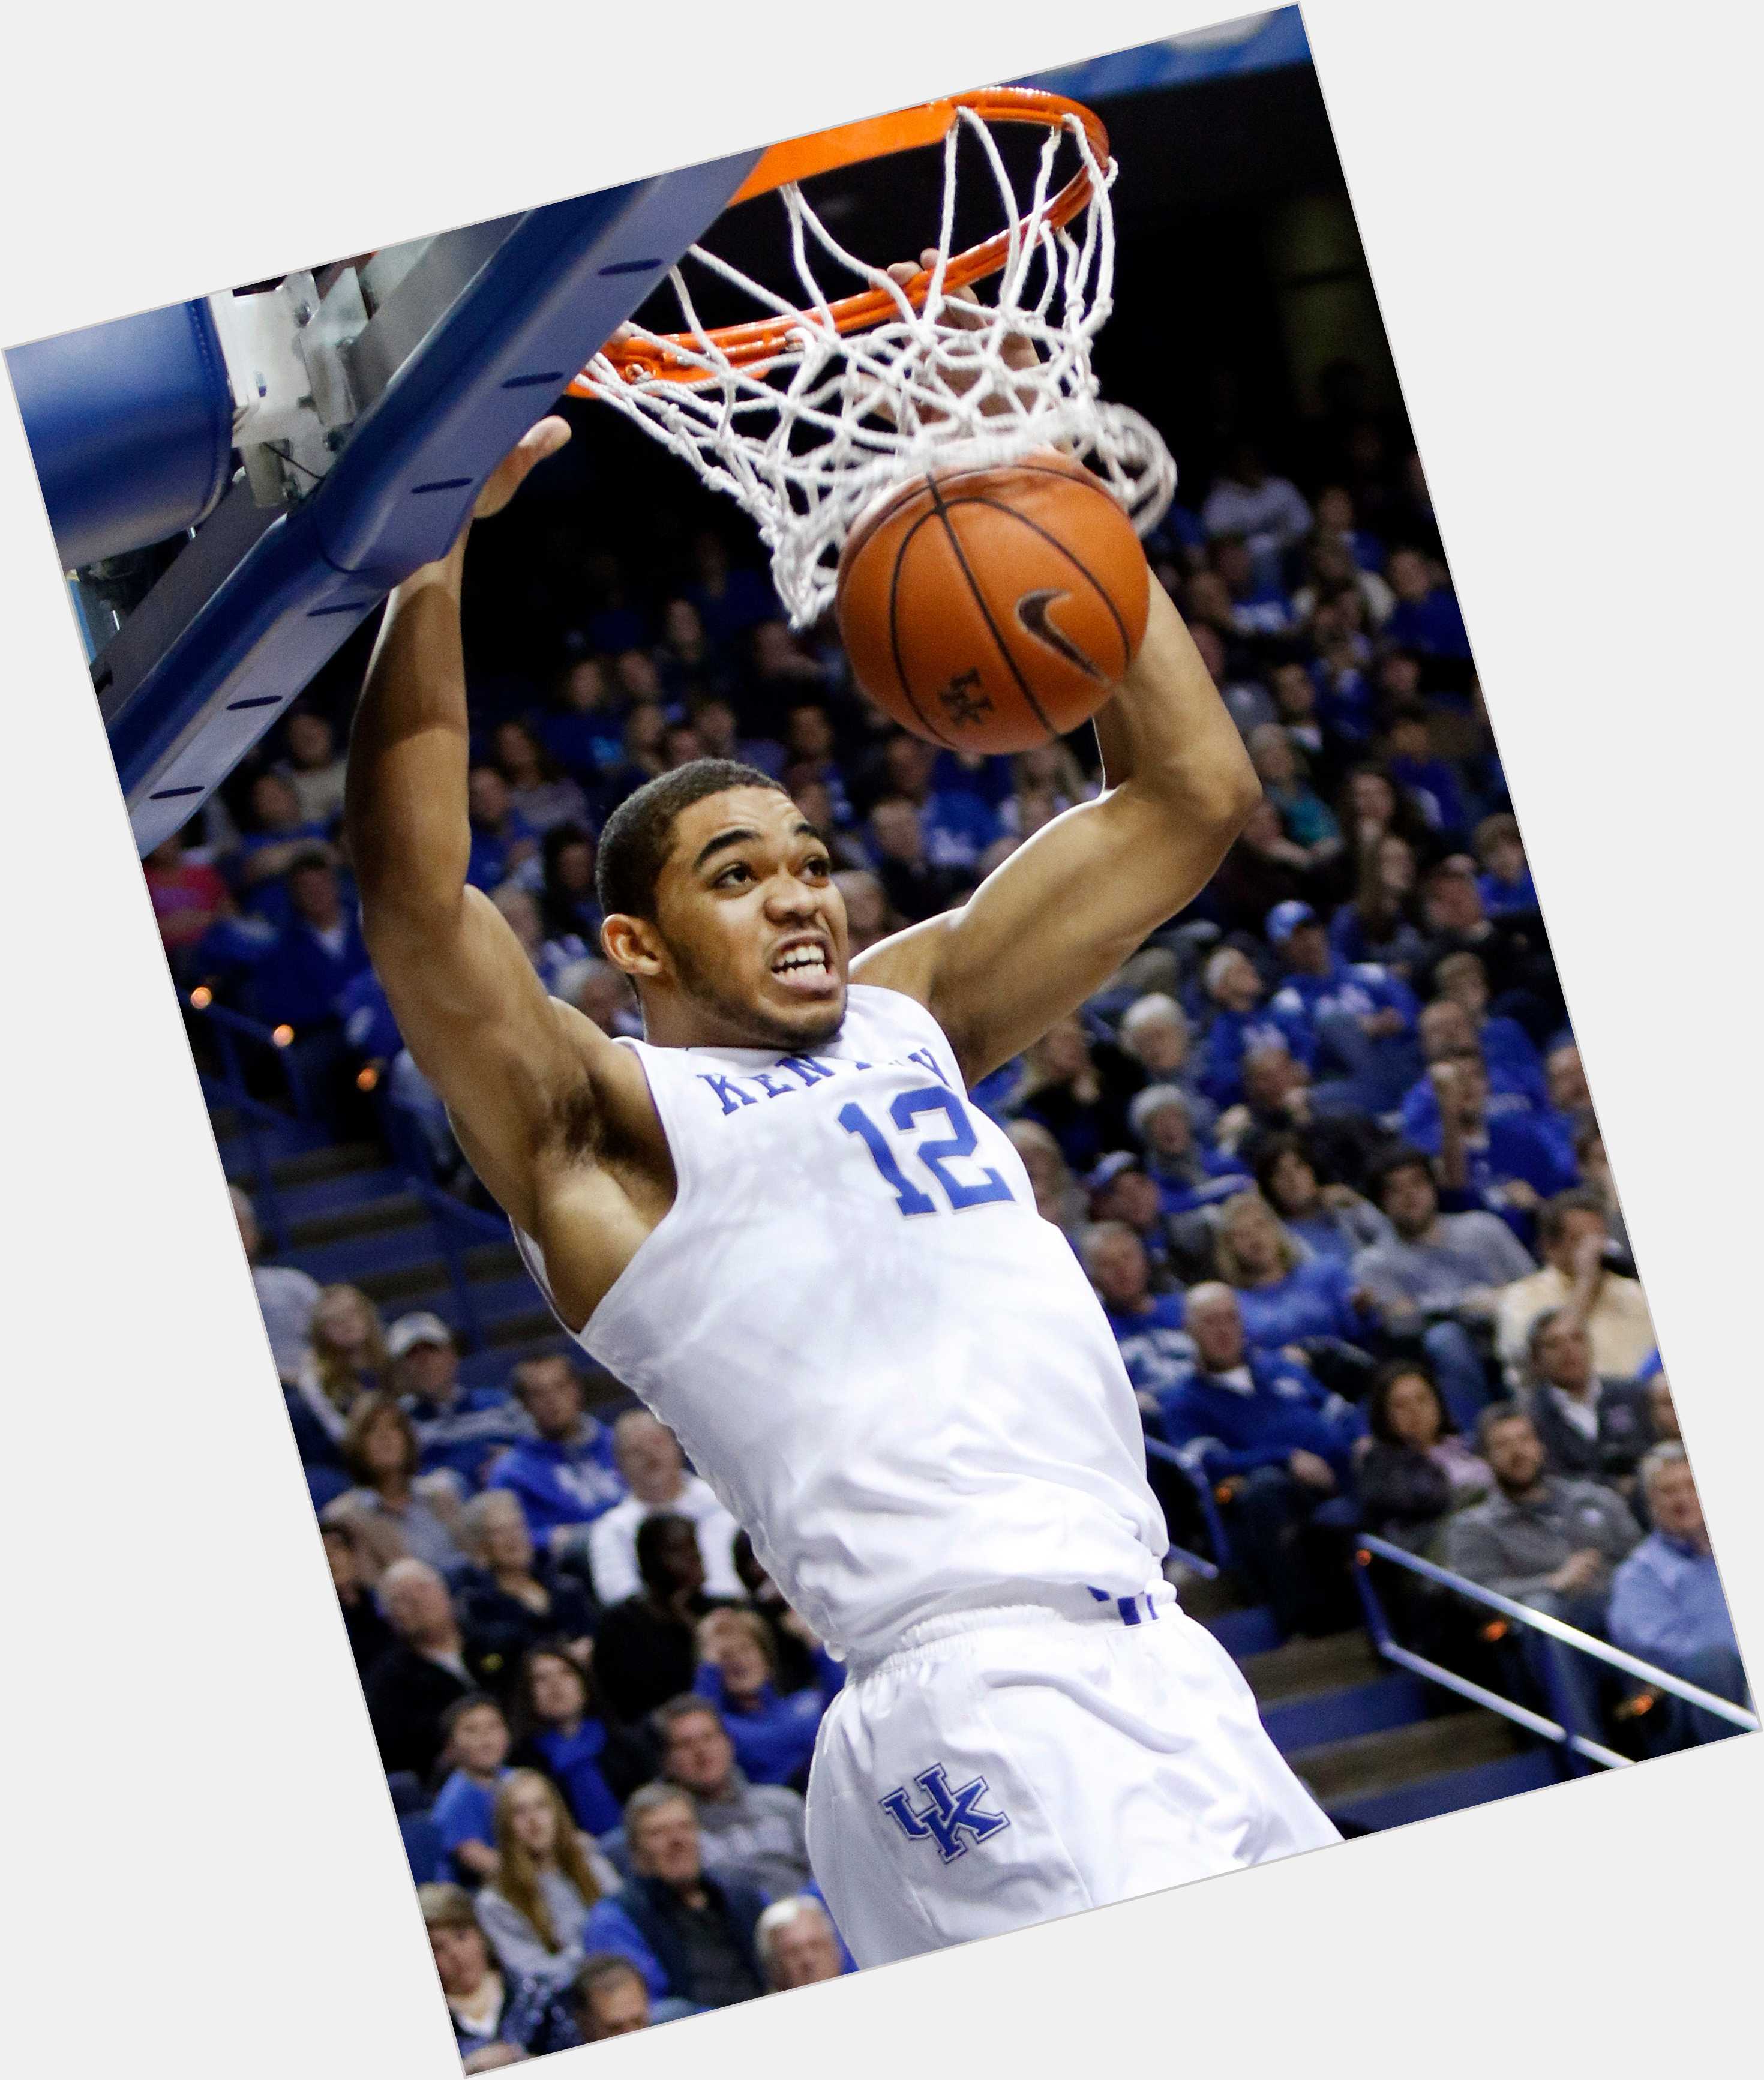 Karl Towns exclusive hot pic 3